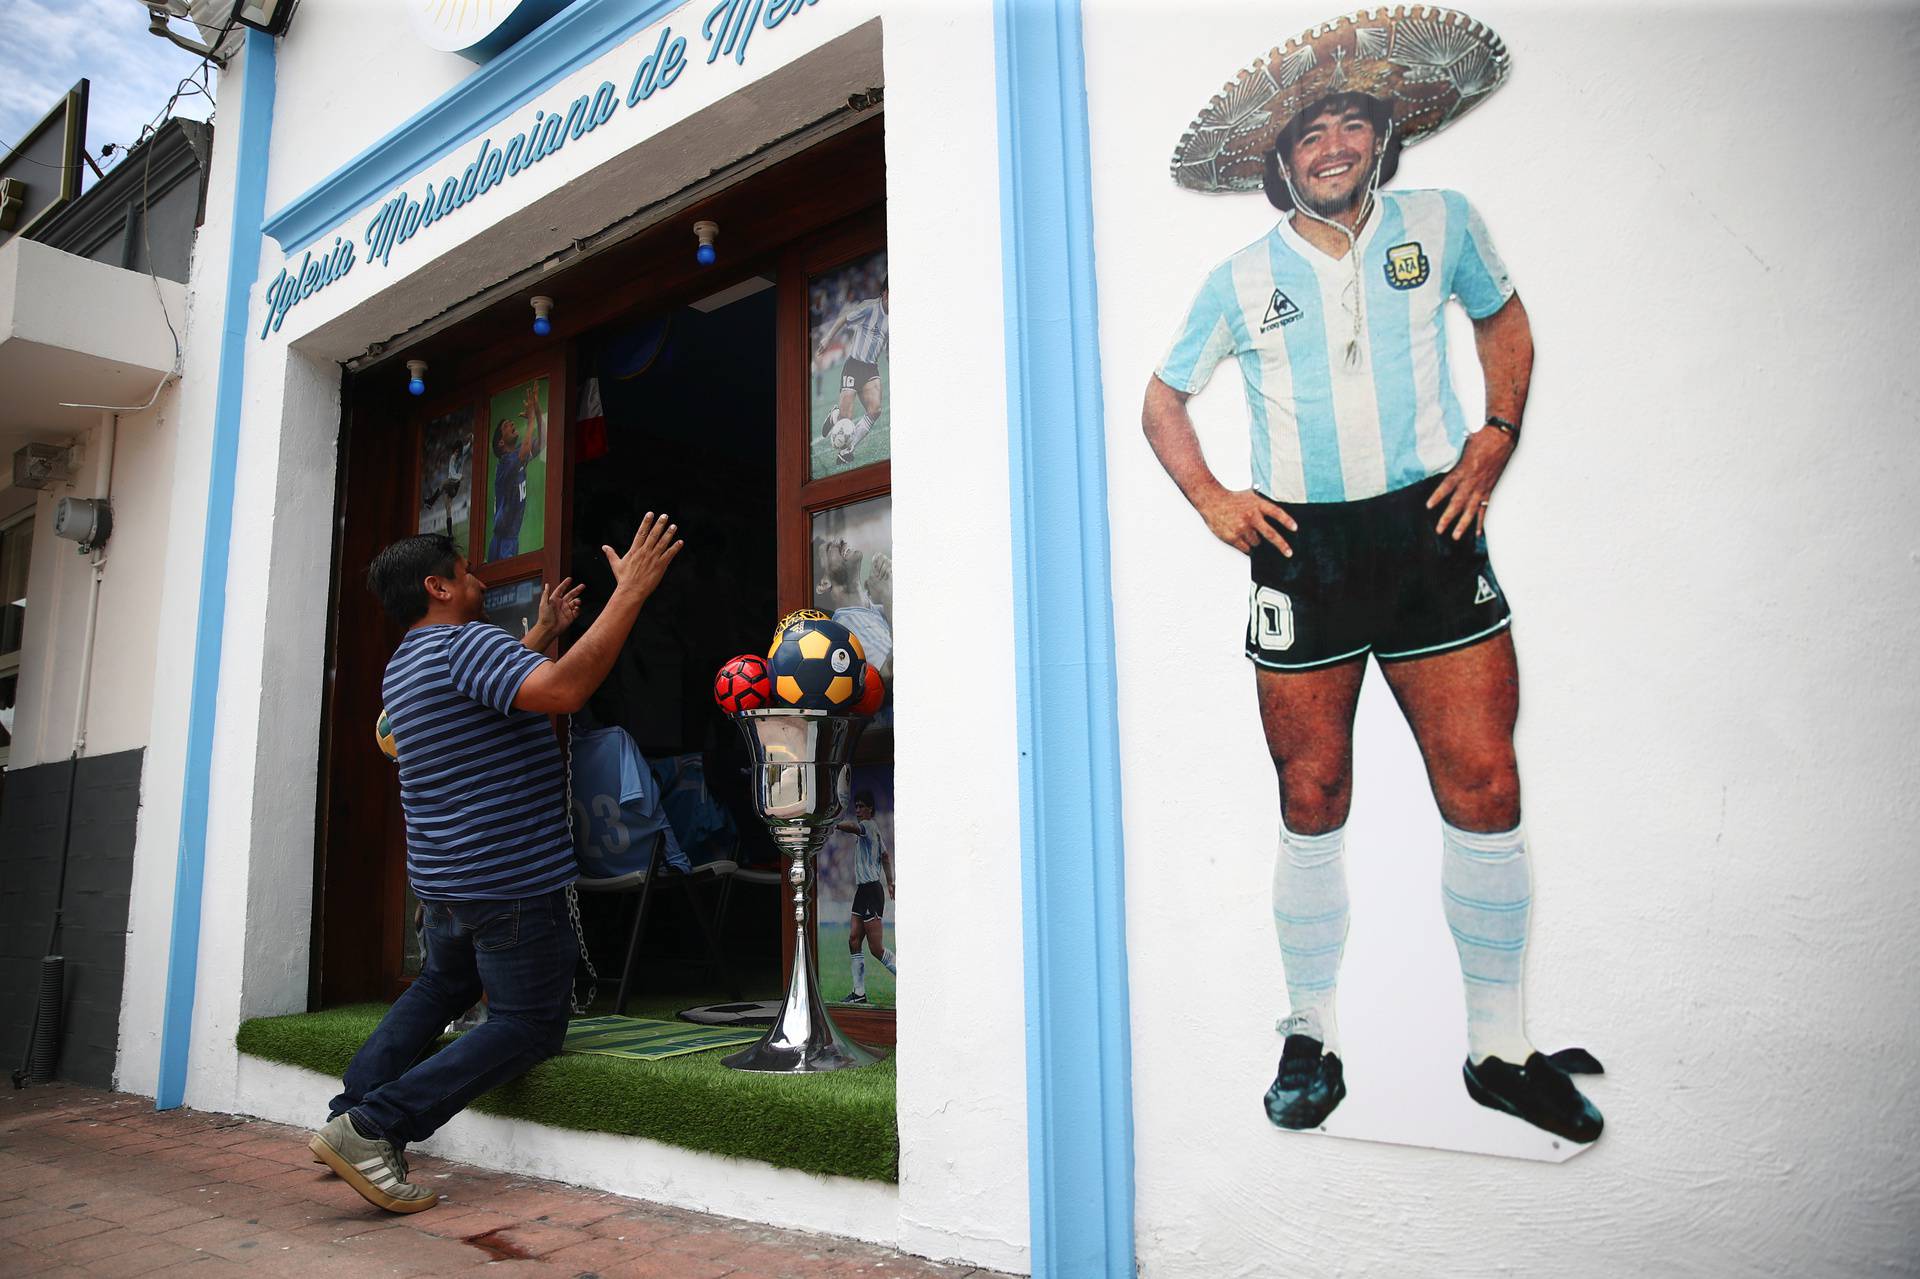 A fan kneels at the entrance to the first Mexico's church in memory of soccer legend Diego Armando Maradona in San Andres Cholula